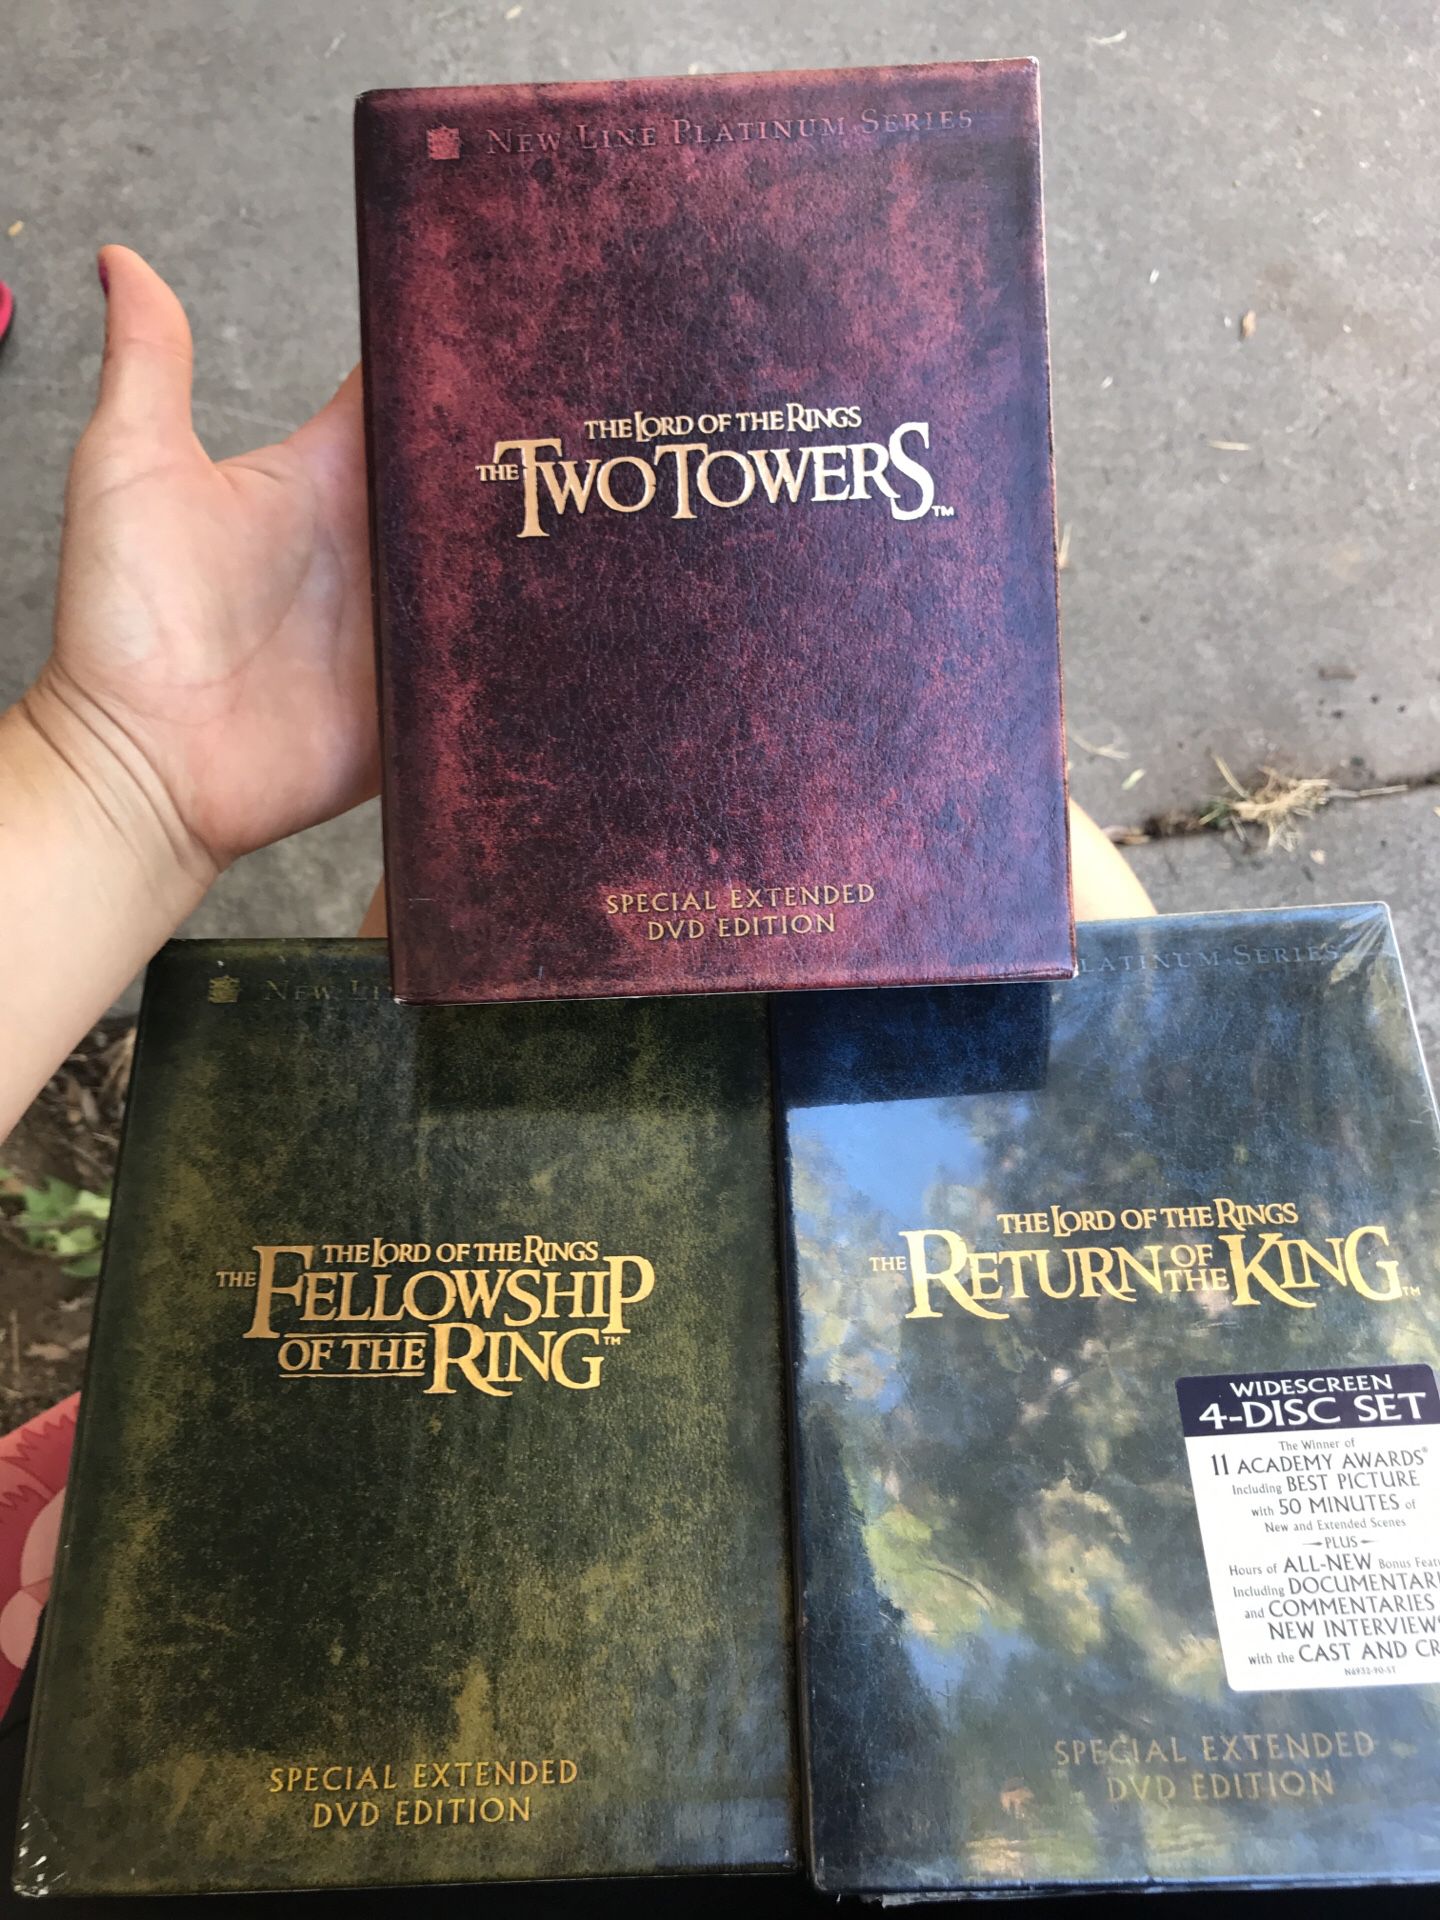 Collection of the lord of the rings